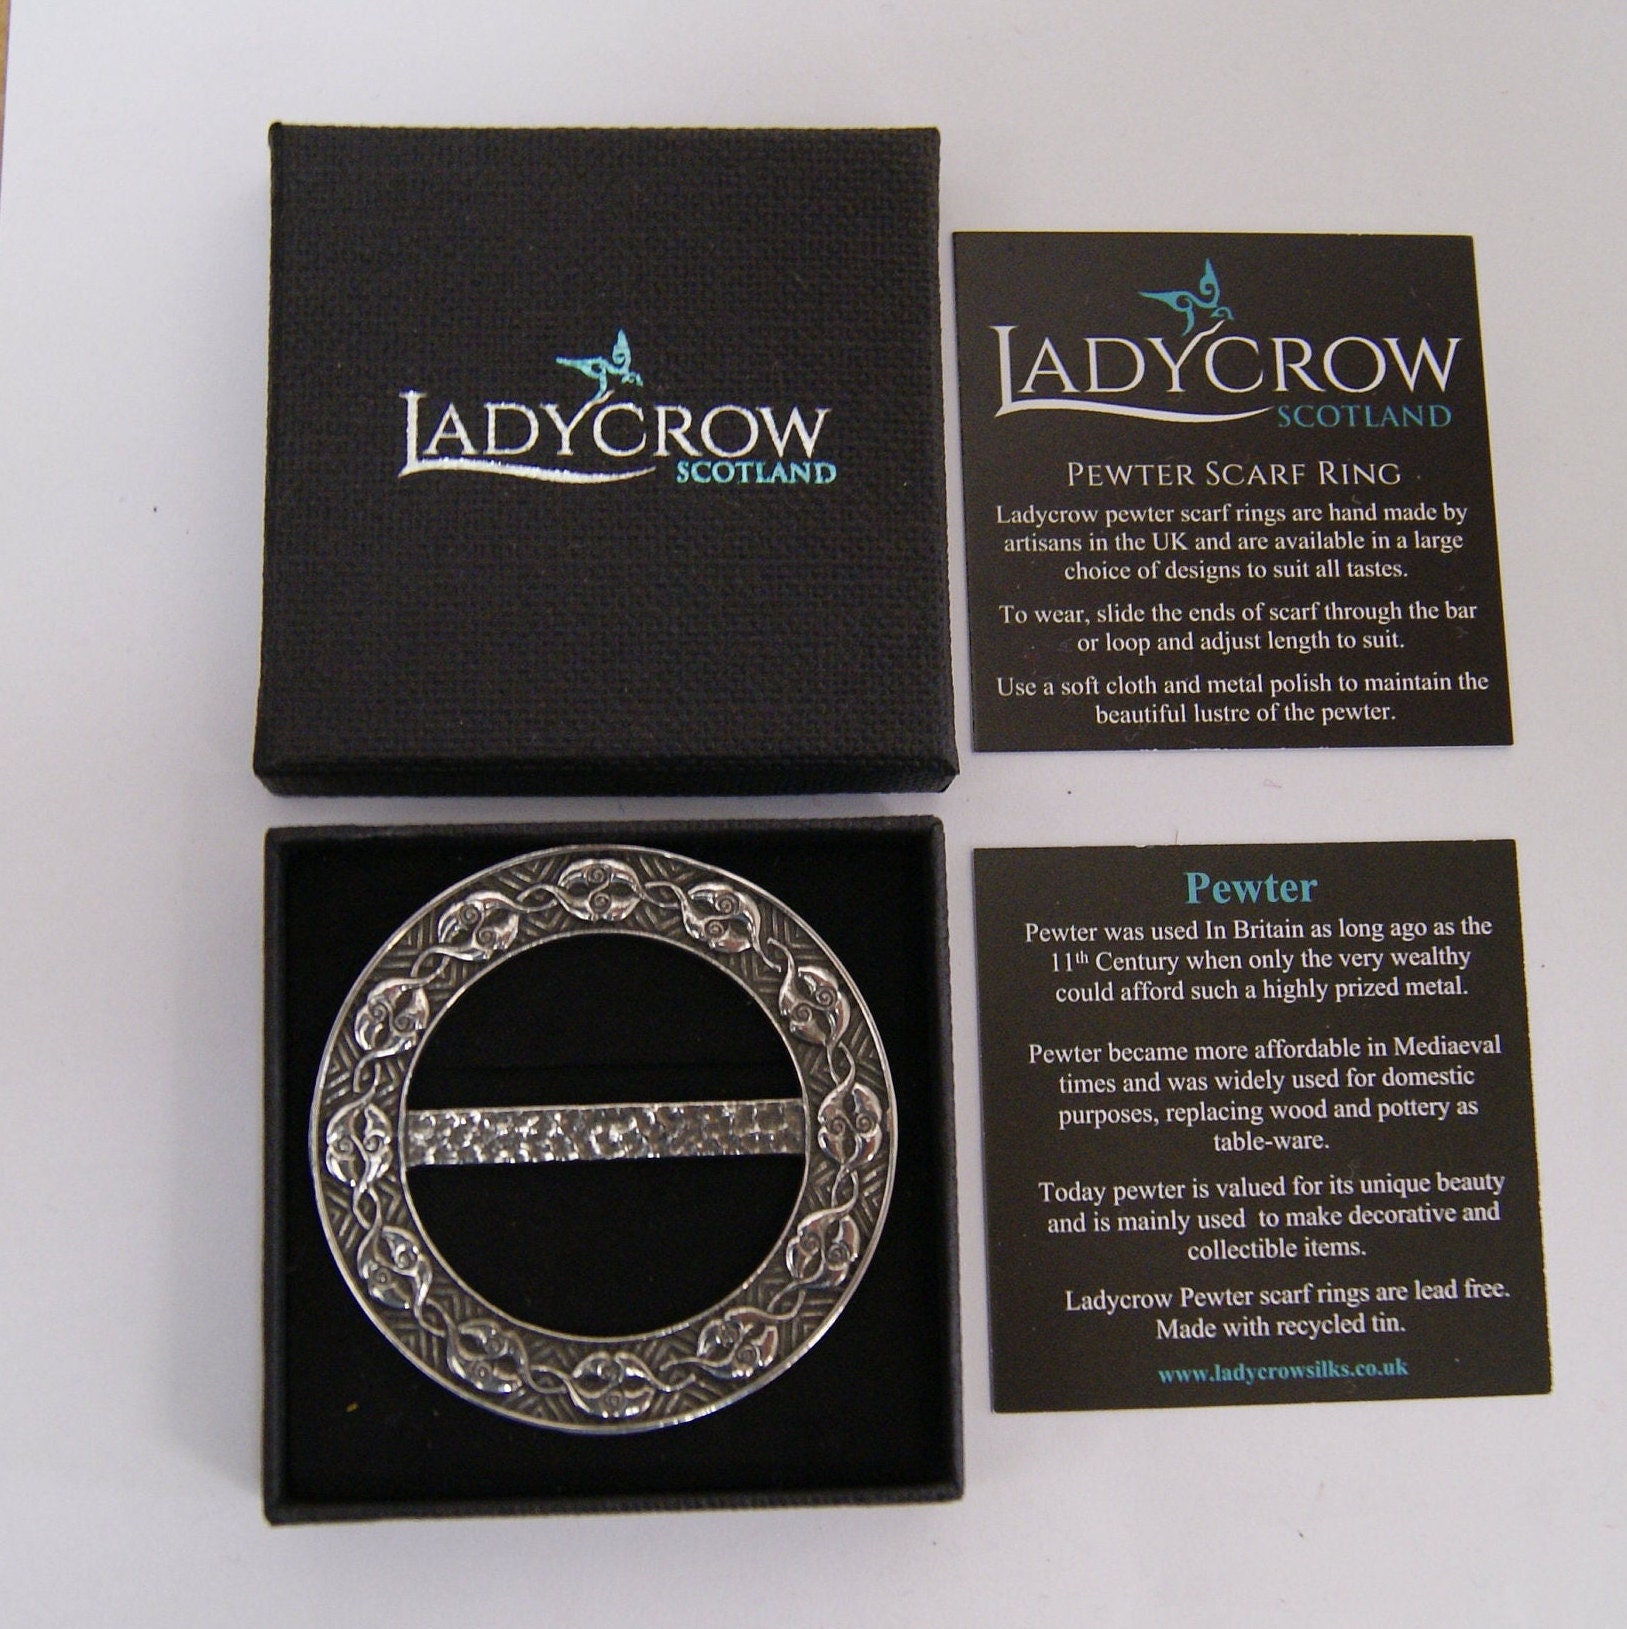 Ladycrow Extra Large Scarf Ring - The Finishing Touch, Abingdon, Oxfordshire